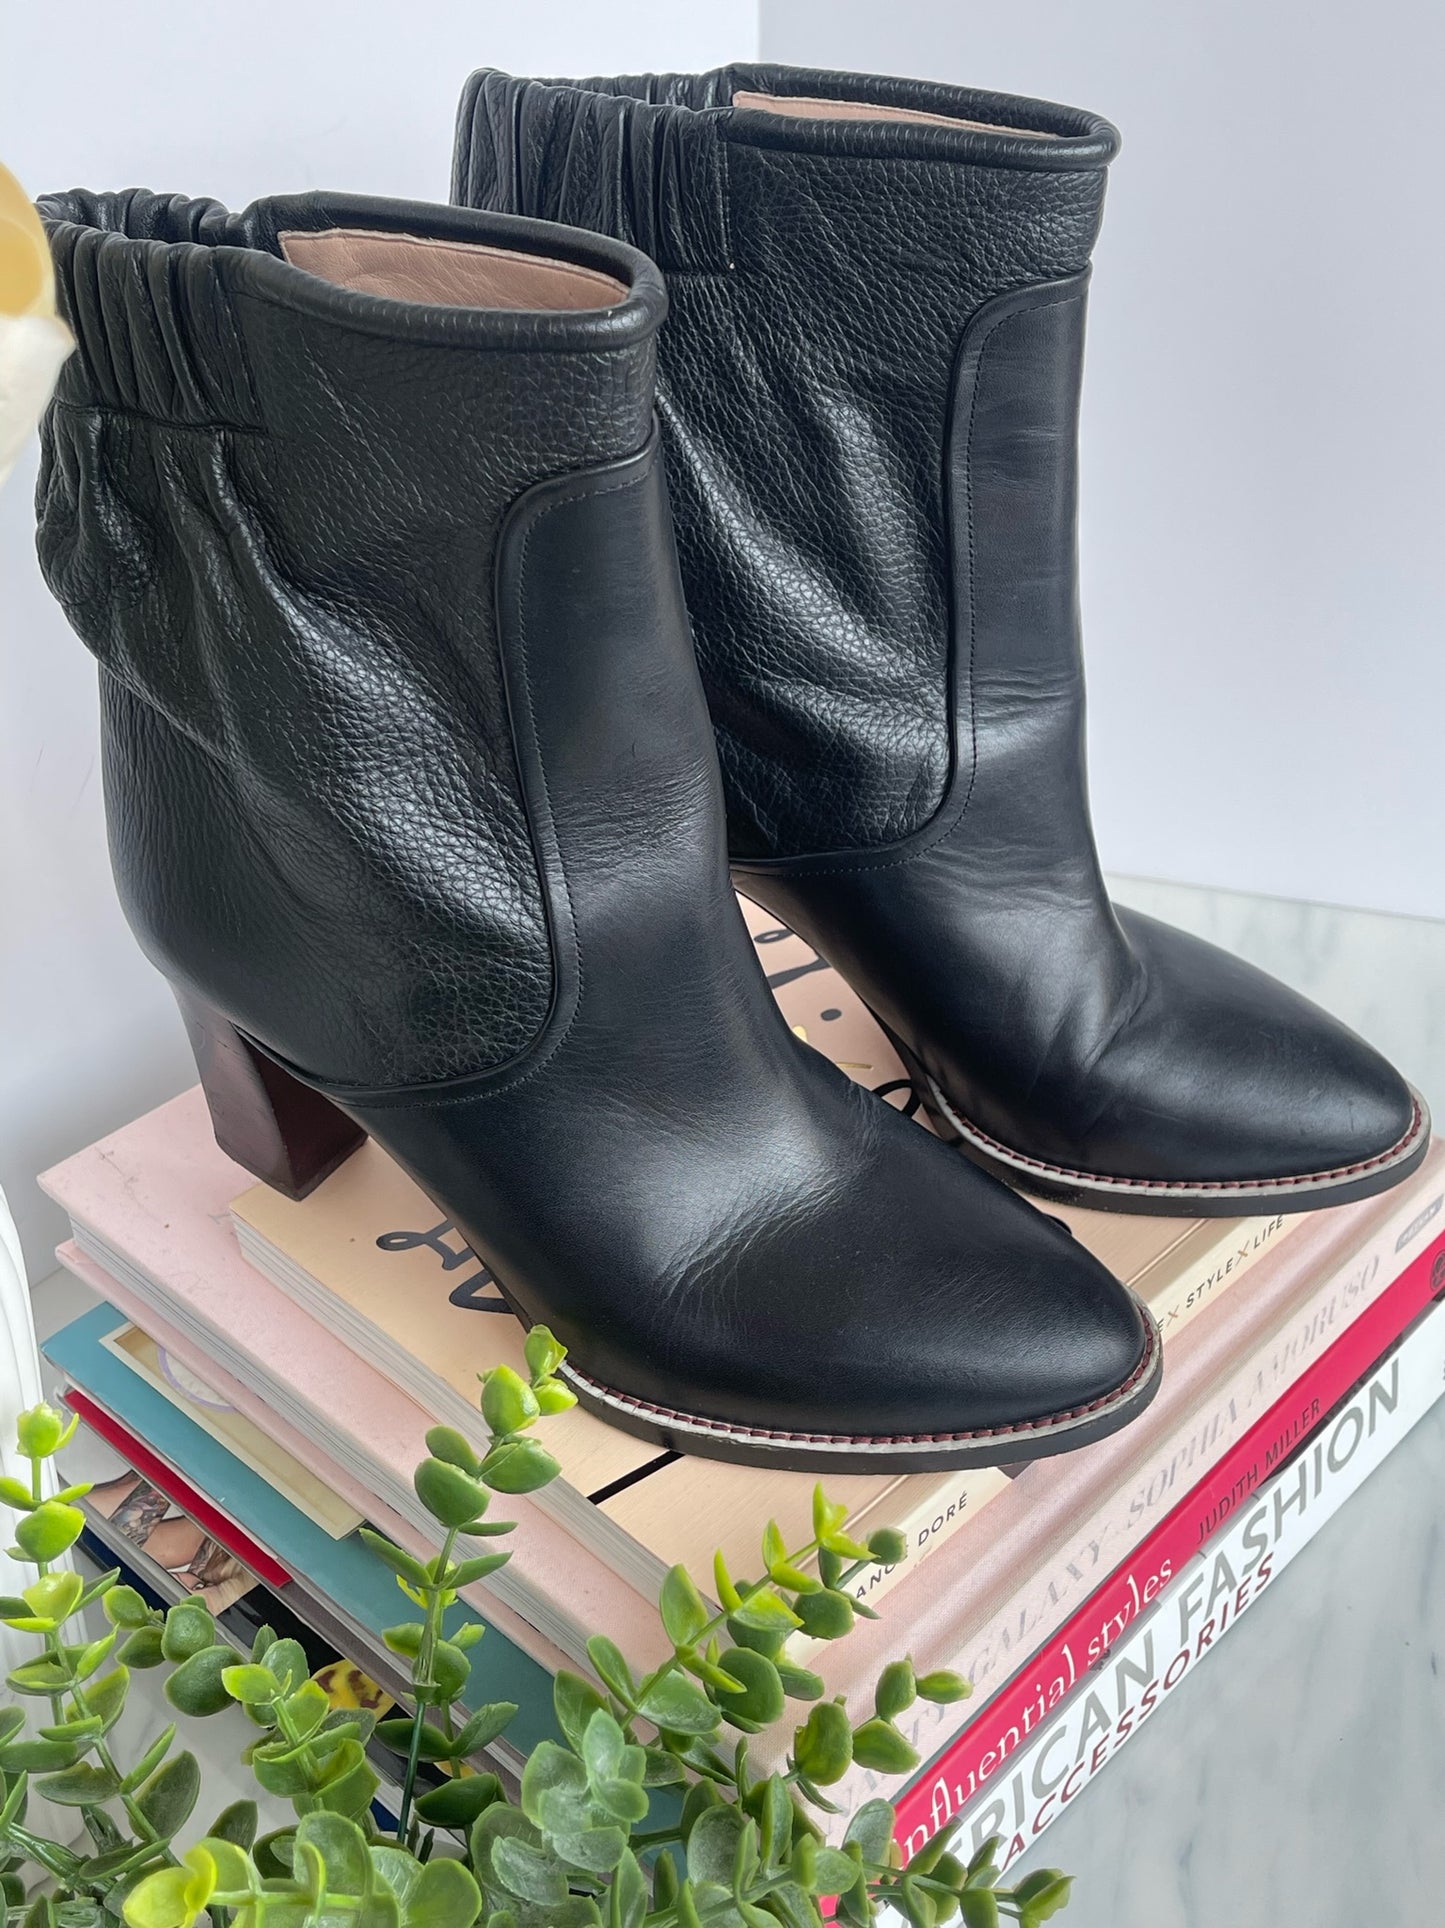 Chloe Black Ankle Boots Size 38.5